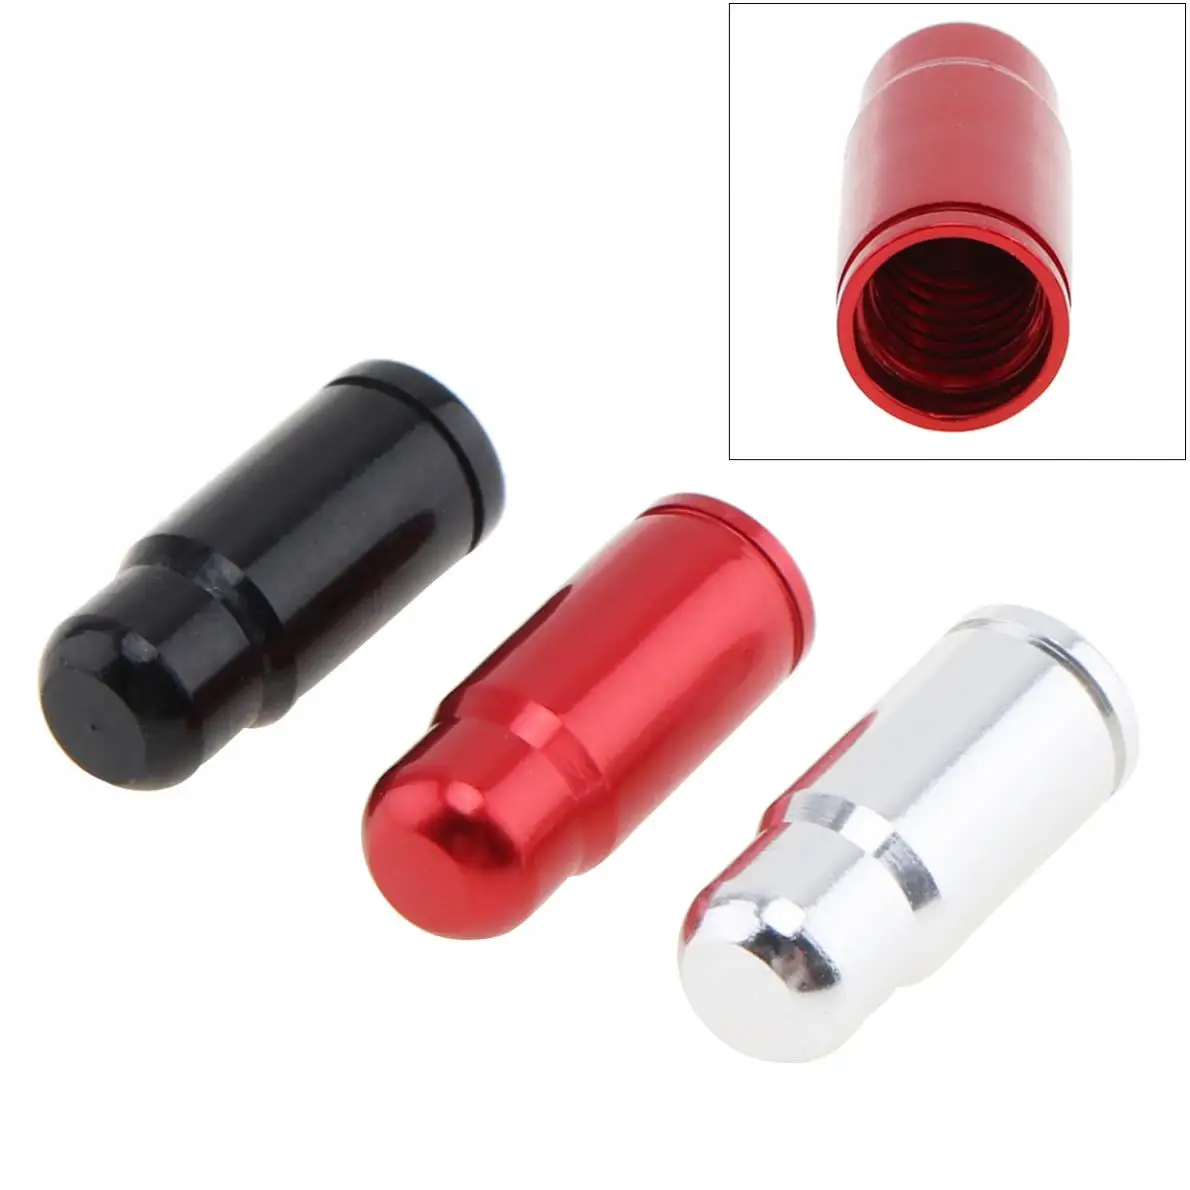 

Ultralight Aluminum Alloy Presta Valve Cap Bike Wheel Tire Covered Protector Valve for Bicycle 3 Colors Optional